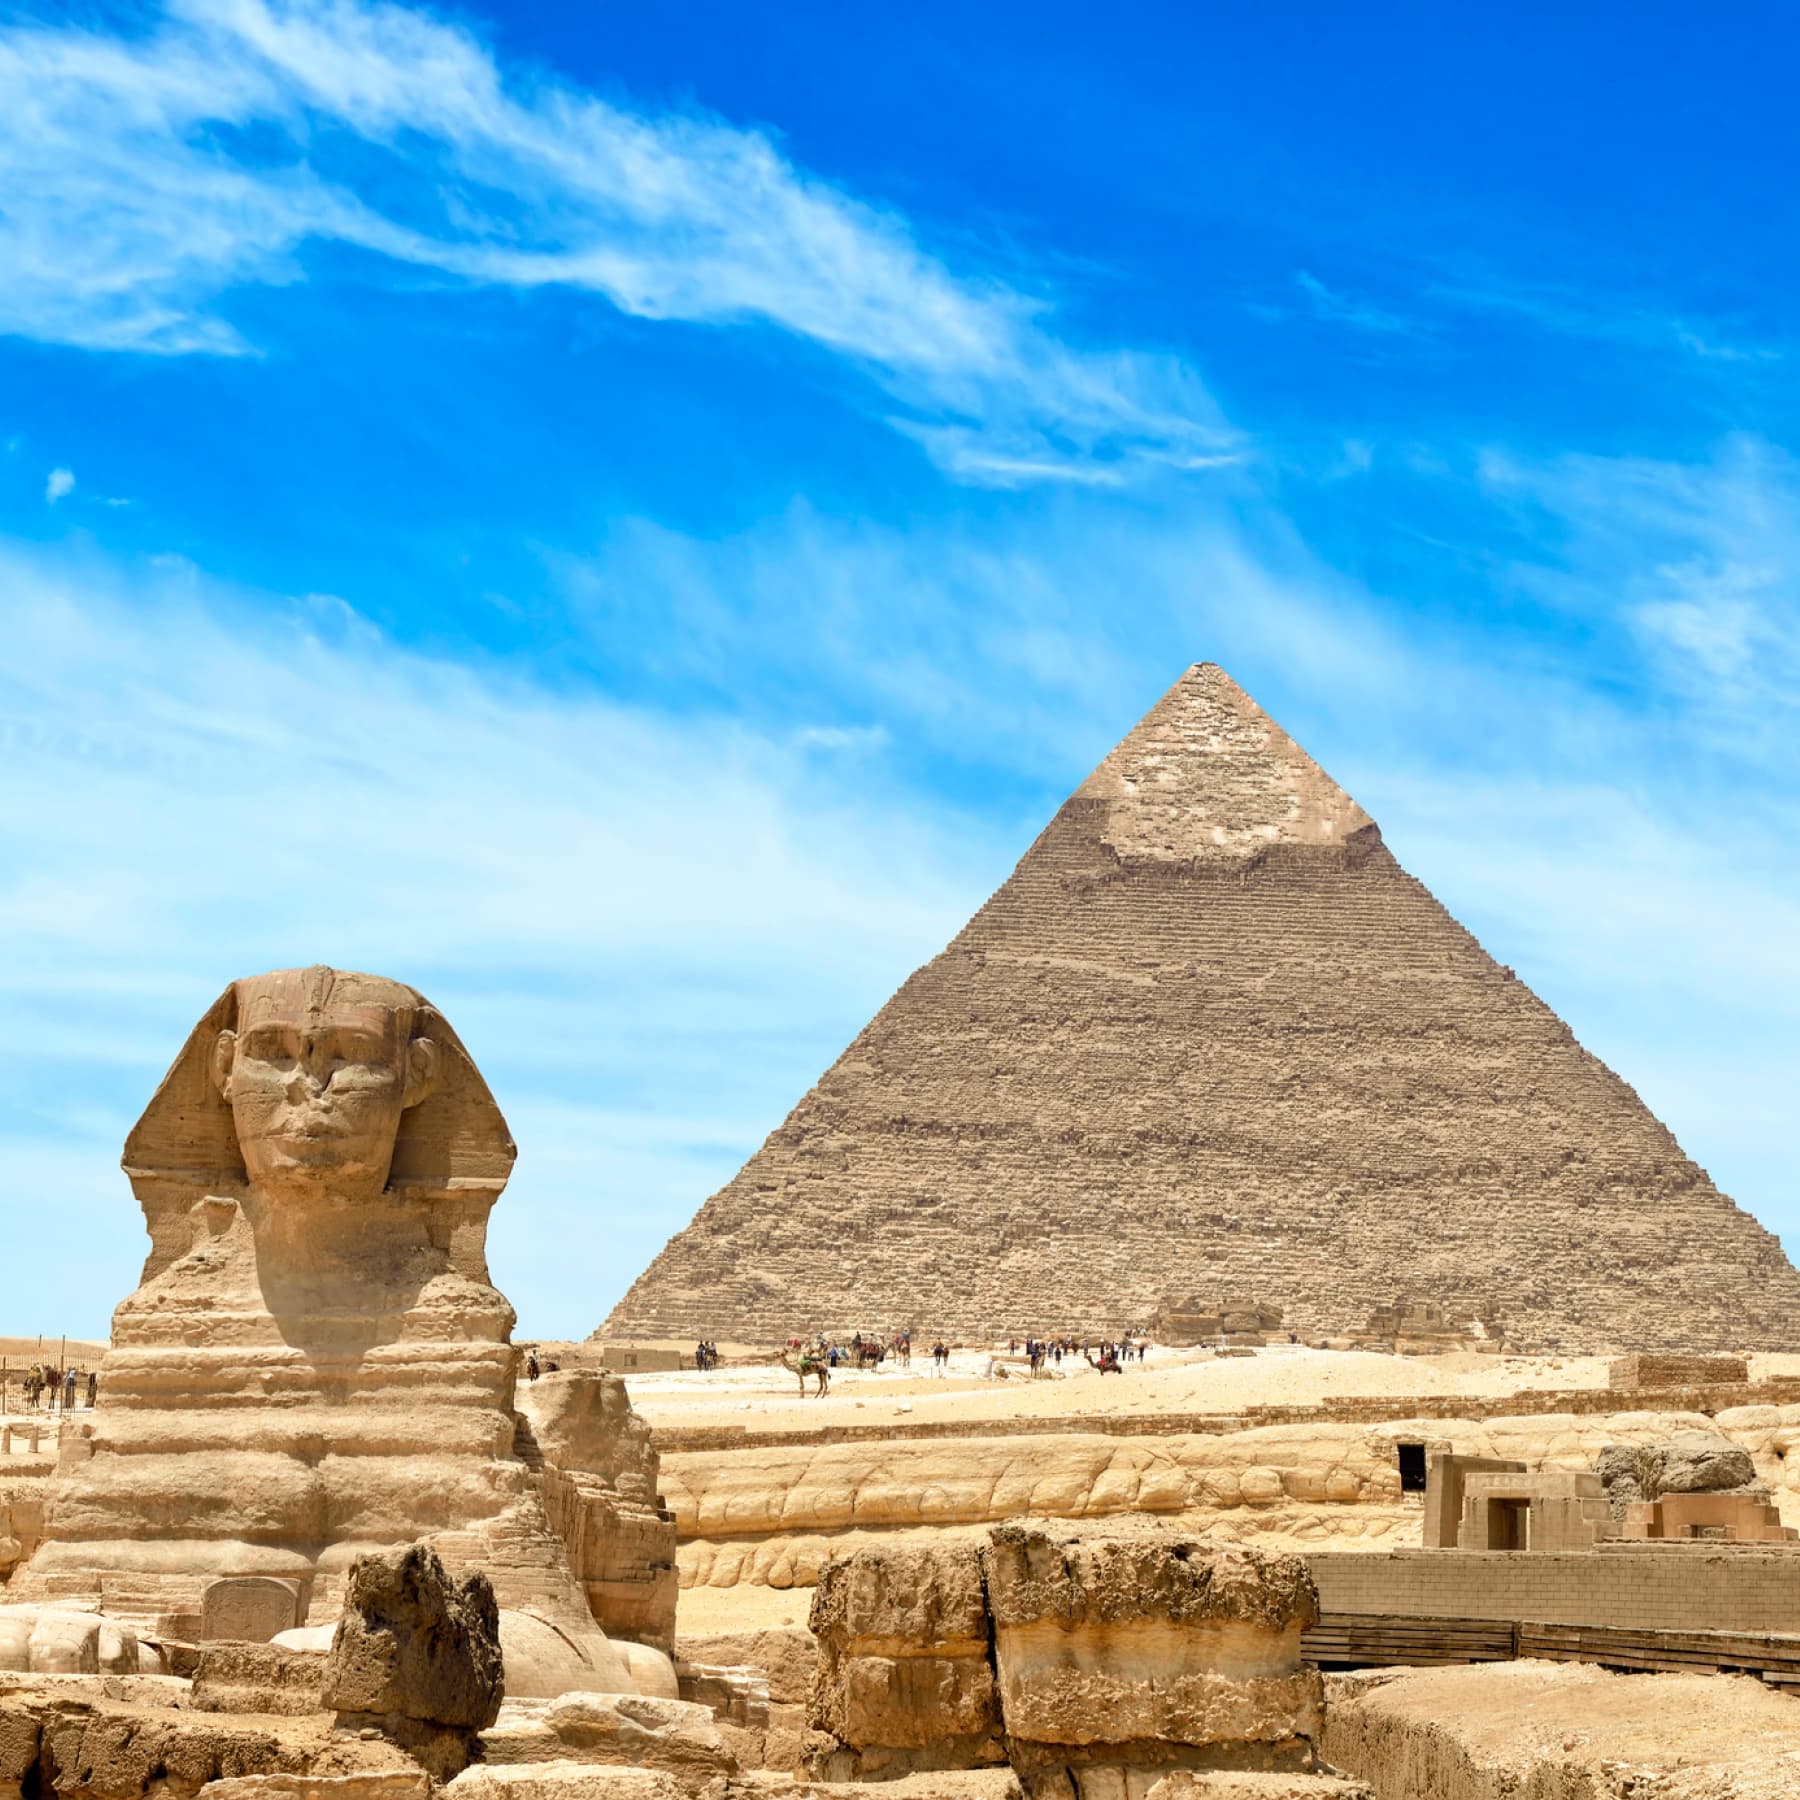 Cairo is one of the best places to visit in 2023